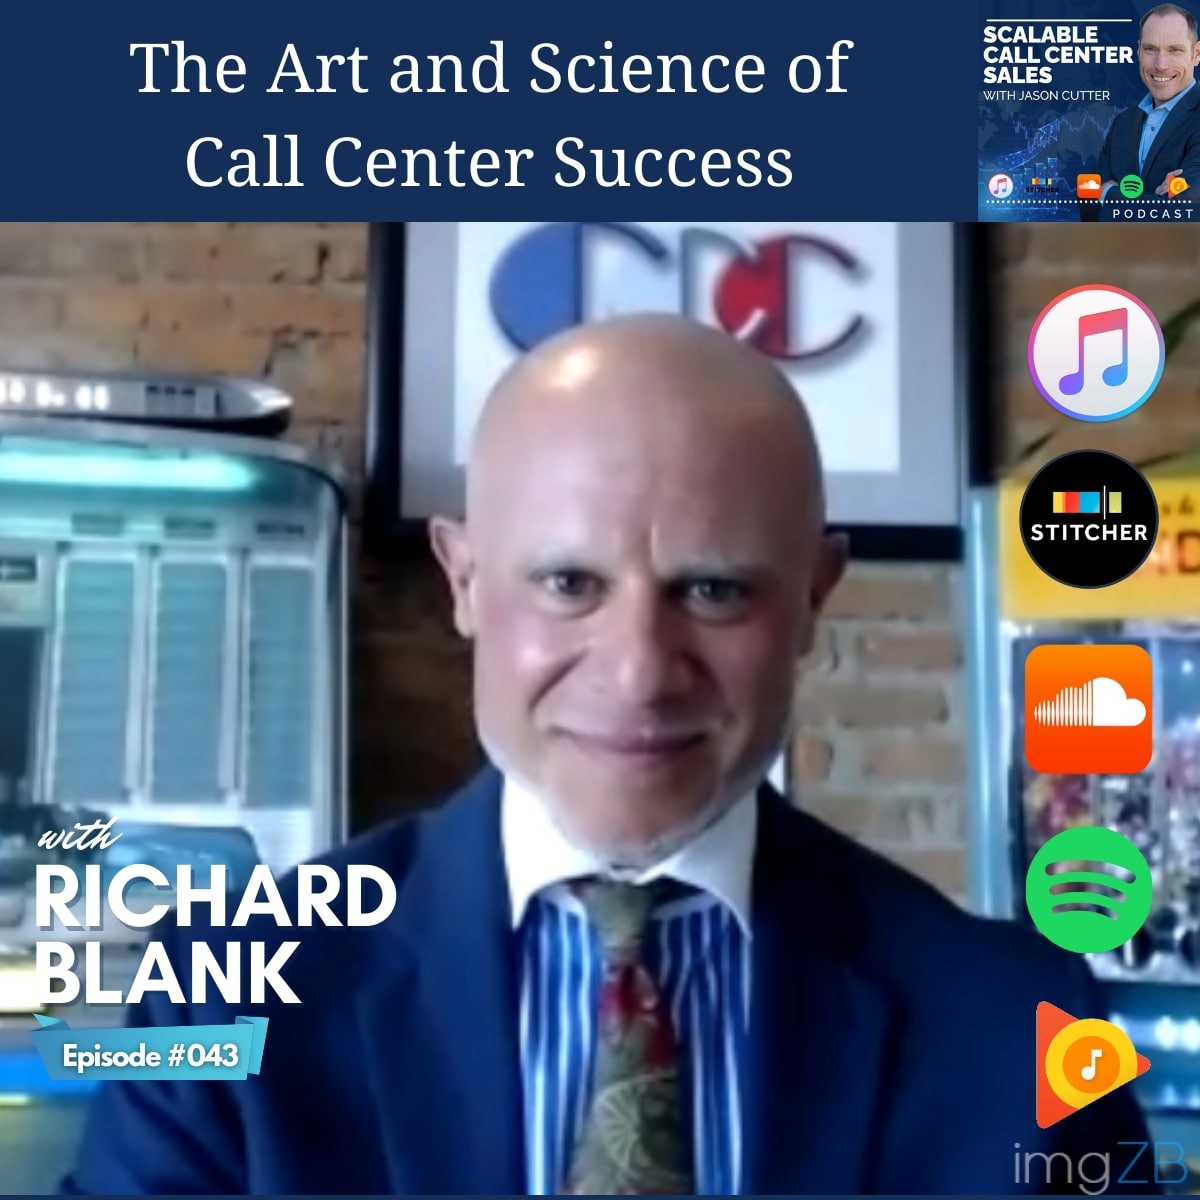 The Art and Science of Call Center Success, with Richard Blank from Costa Rica's Call Center - Cutte